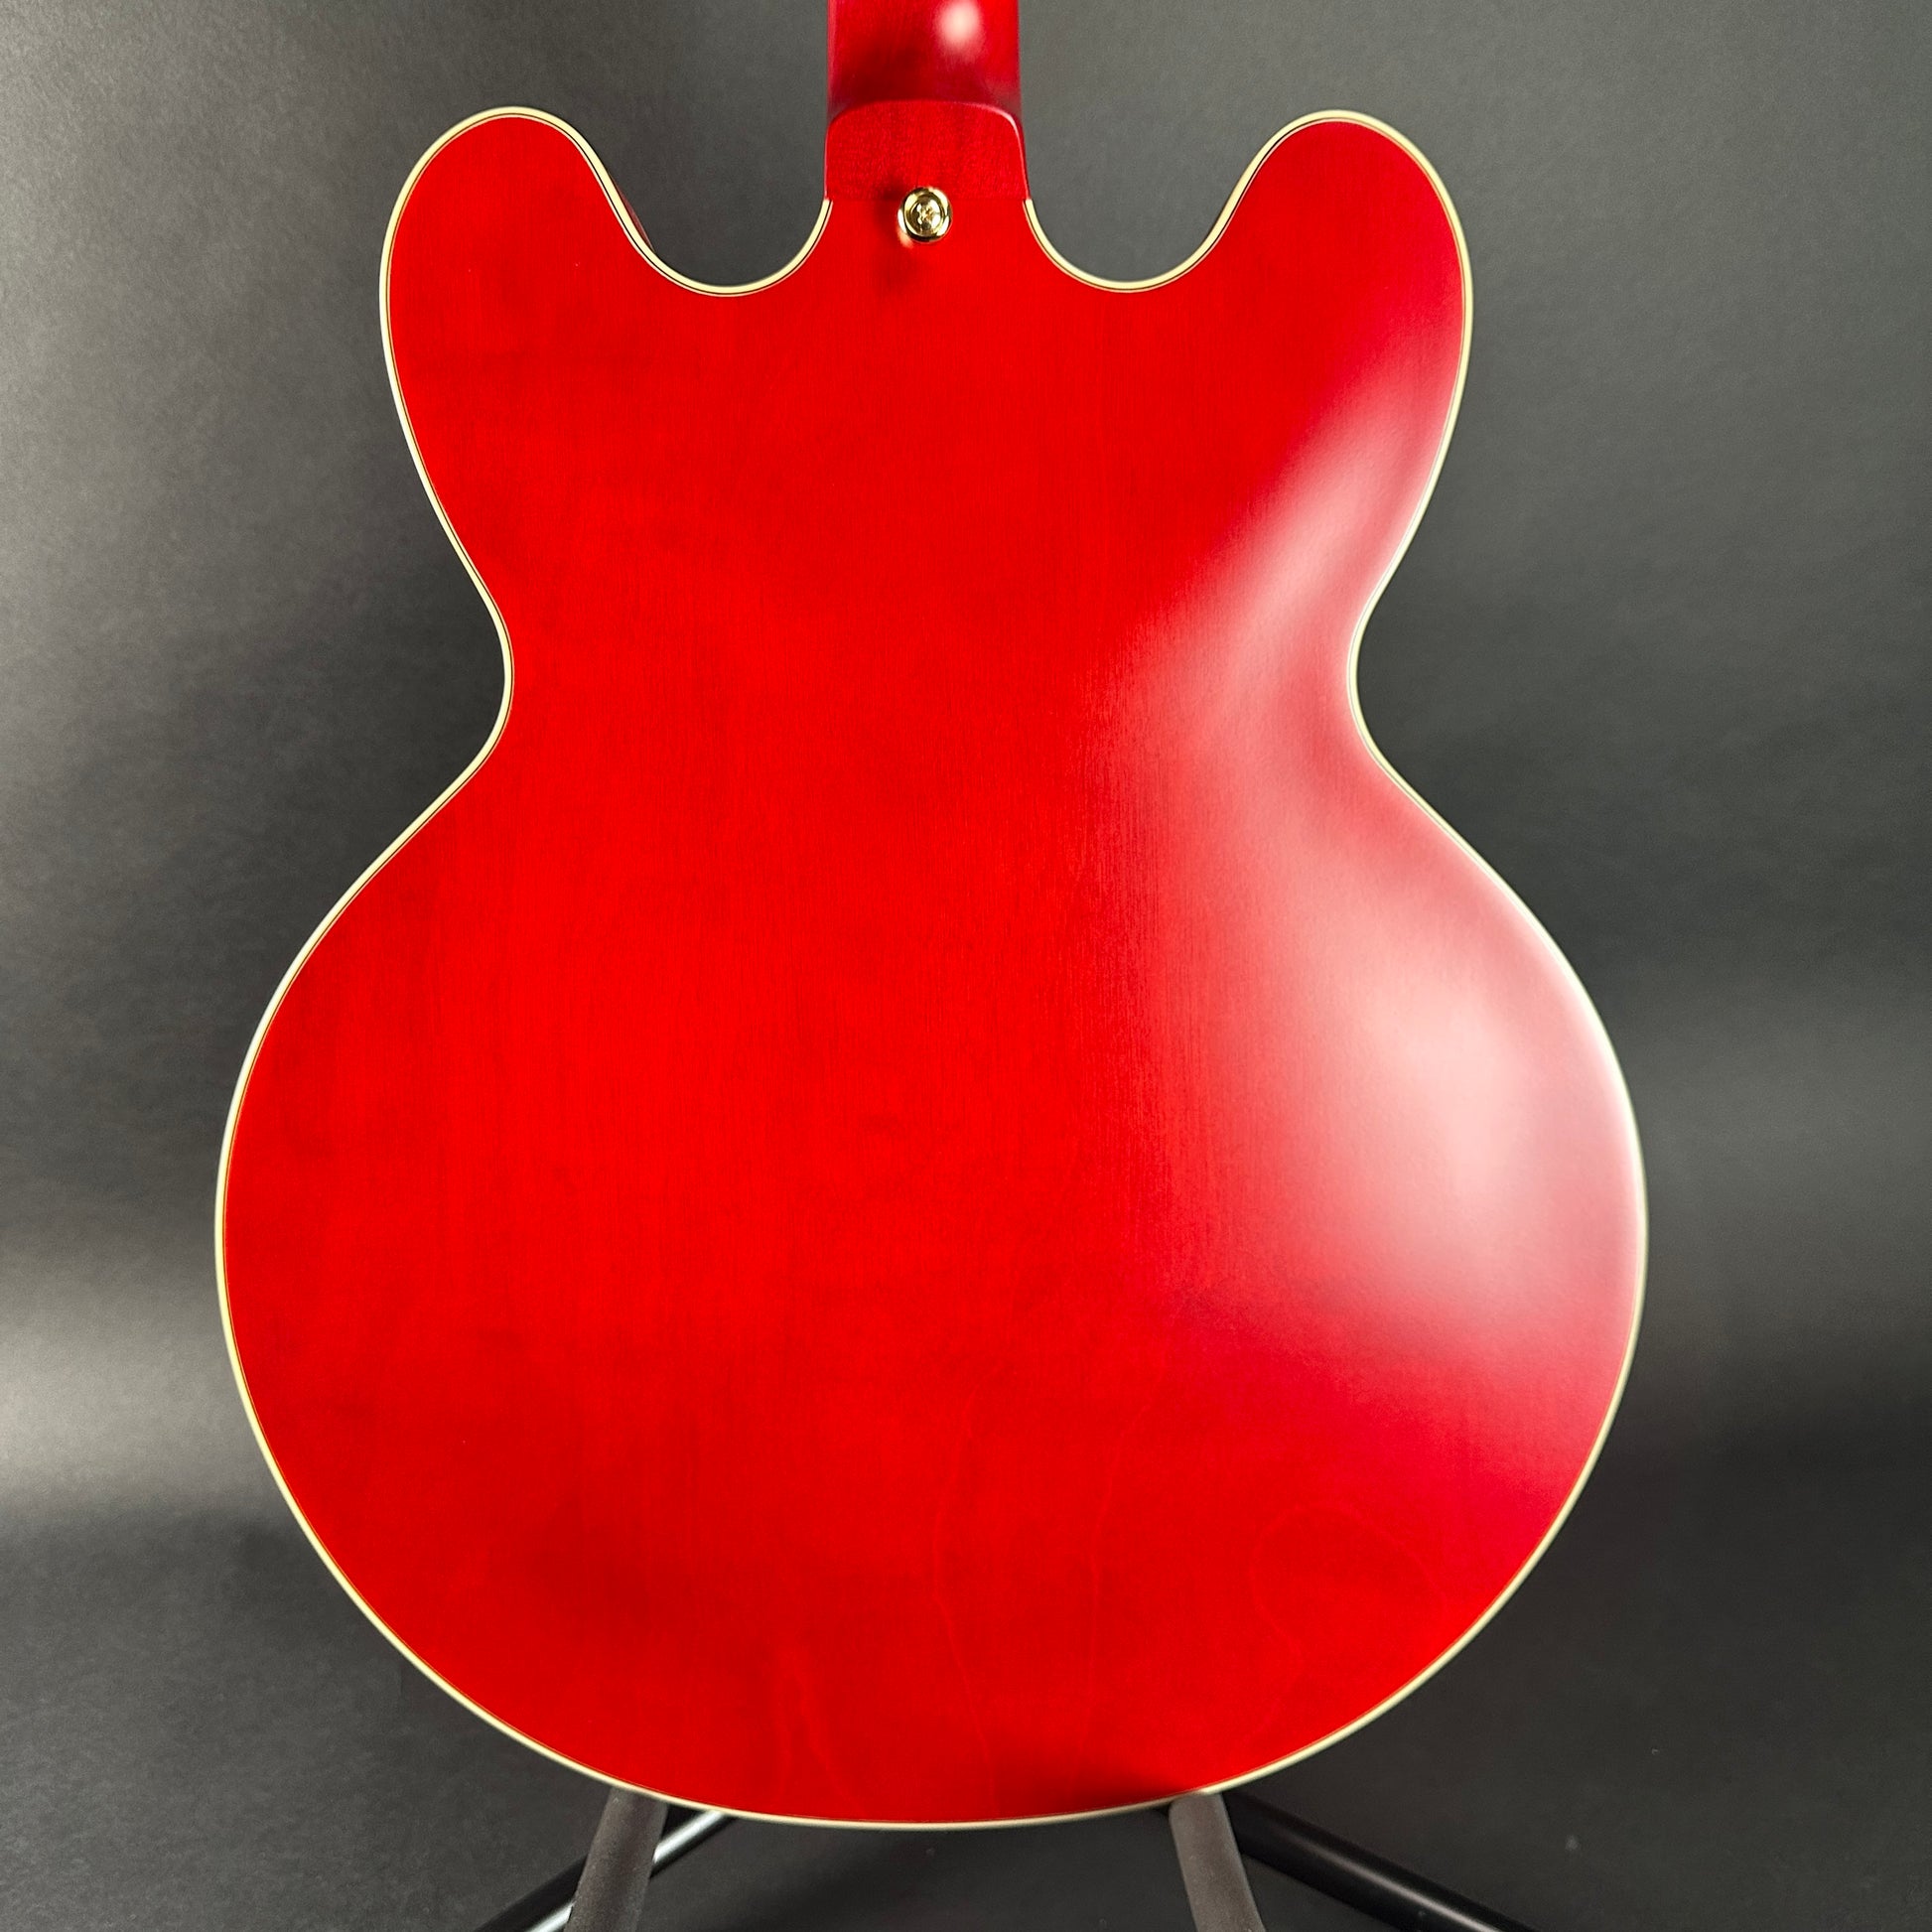 Back of Used Epiphone "Inspired by Gibson" Custom 1959 ES-355 Cherry Red.